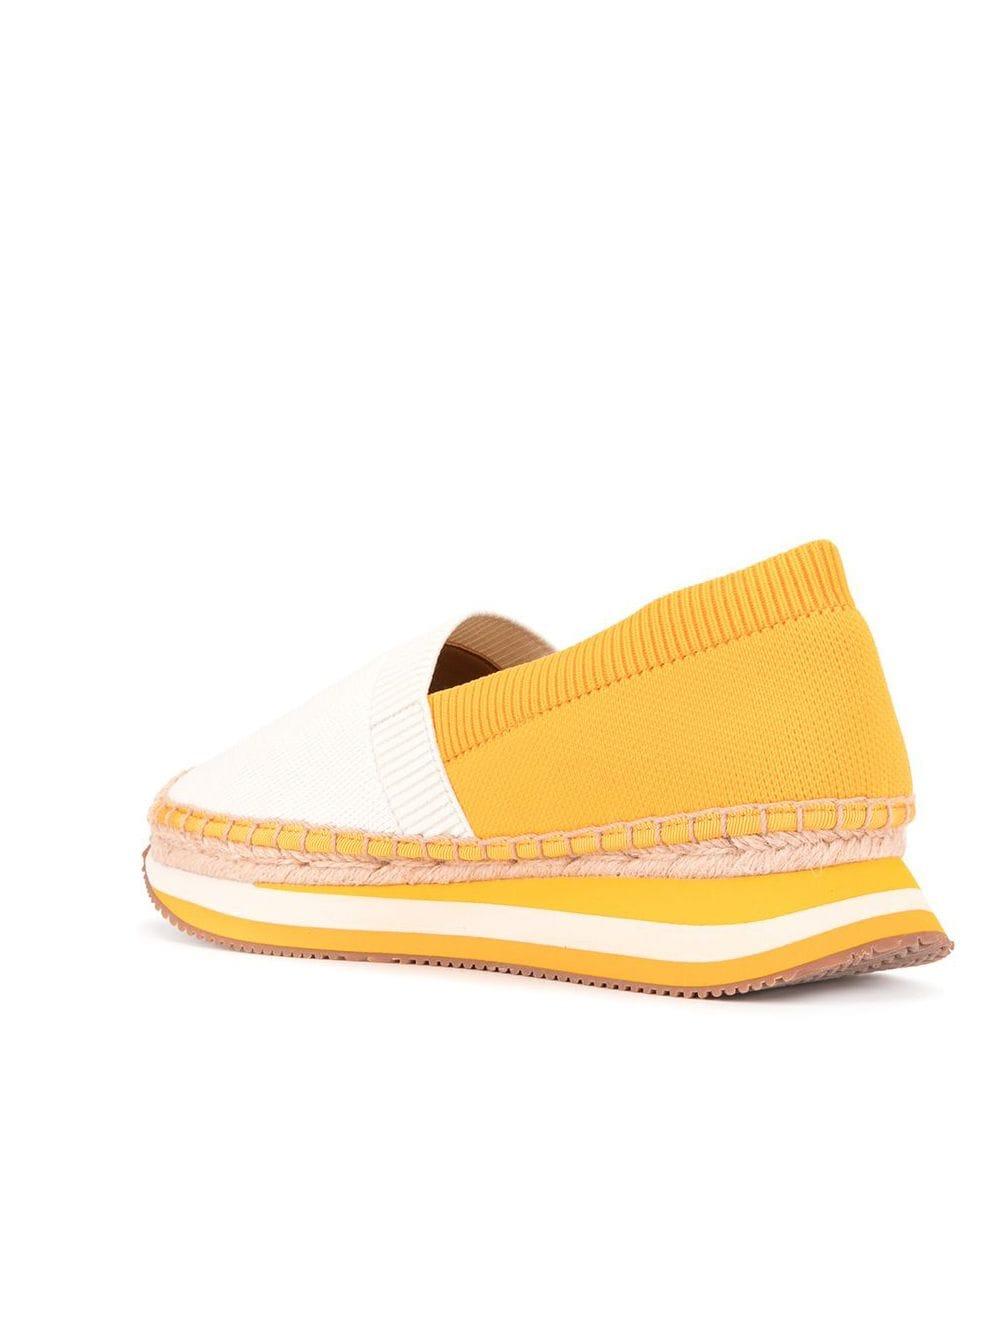 Tory Burch Rubber Daisy Slip On Trainer in Yellow - Lyst